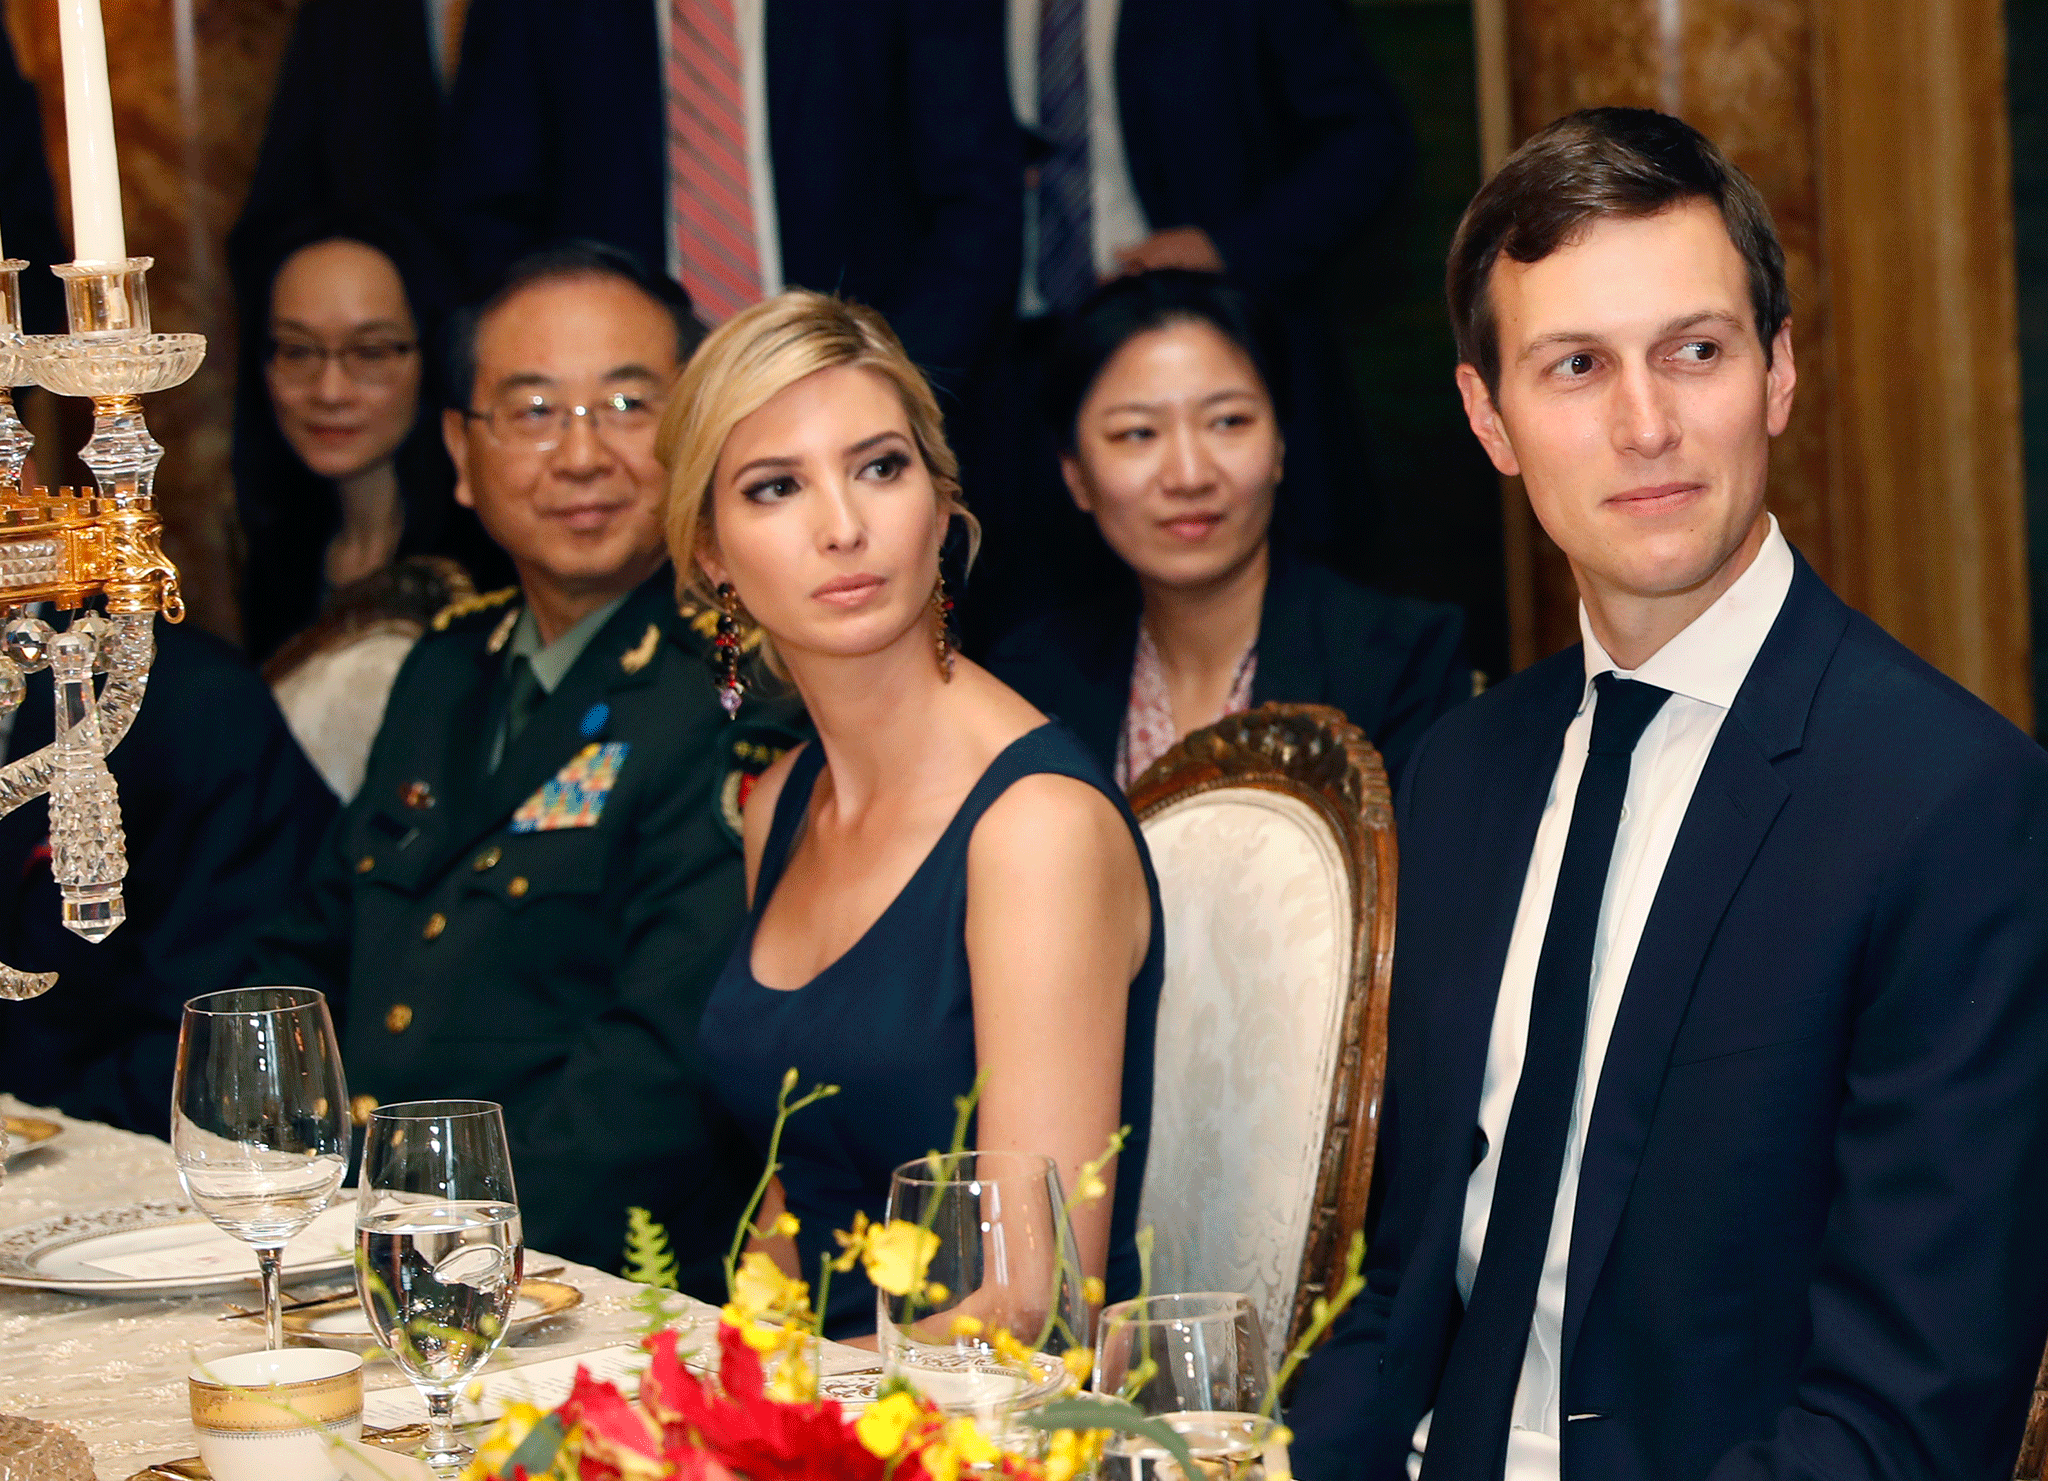 Kushner failed to disclose millions in loans he had personally guaranteed in his financial disclosures